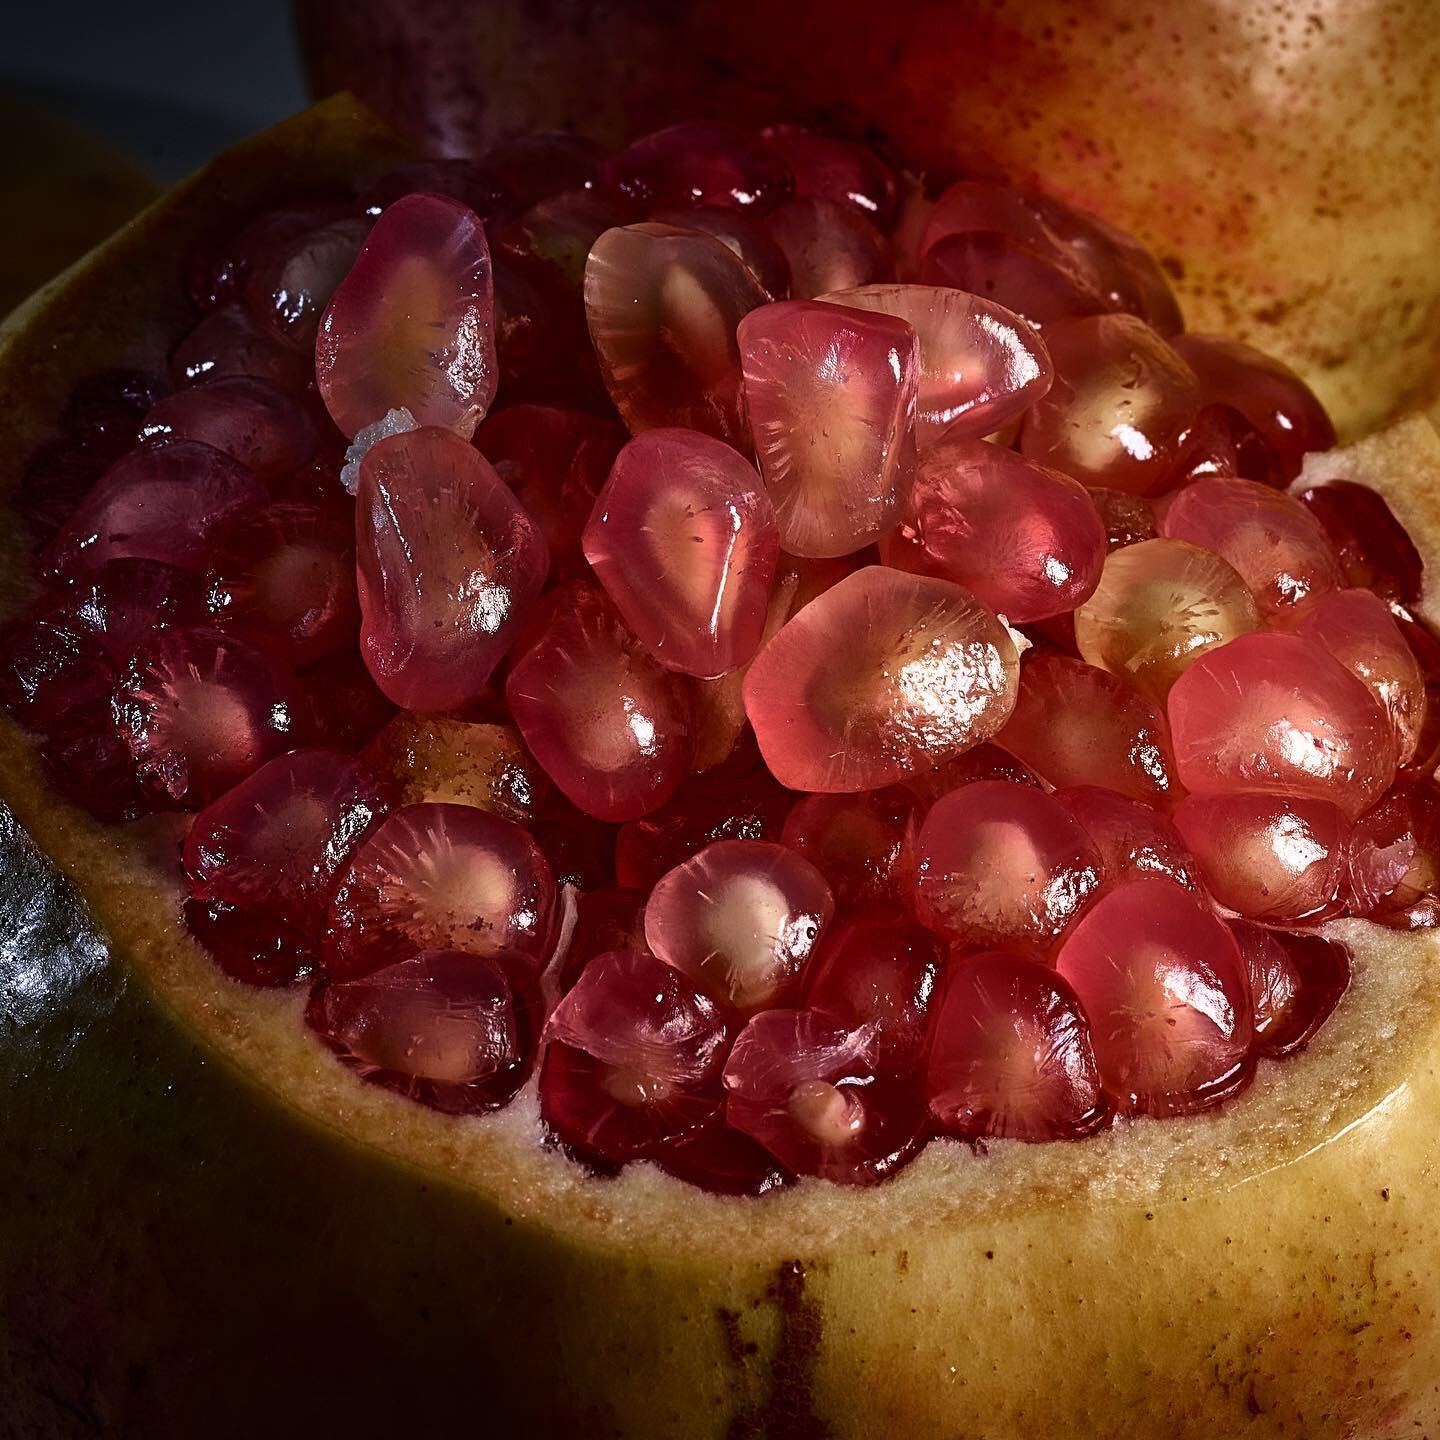 It&rsquo;s the season. Beautiful pomegranate from our local market.. #followseason #pomegranate #autumnvibes🍁 #autumn #homecooking #phaseonehk #120mmphotography #macrophotography